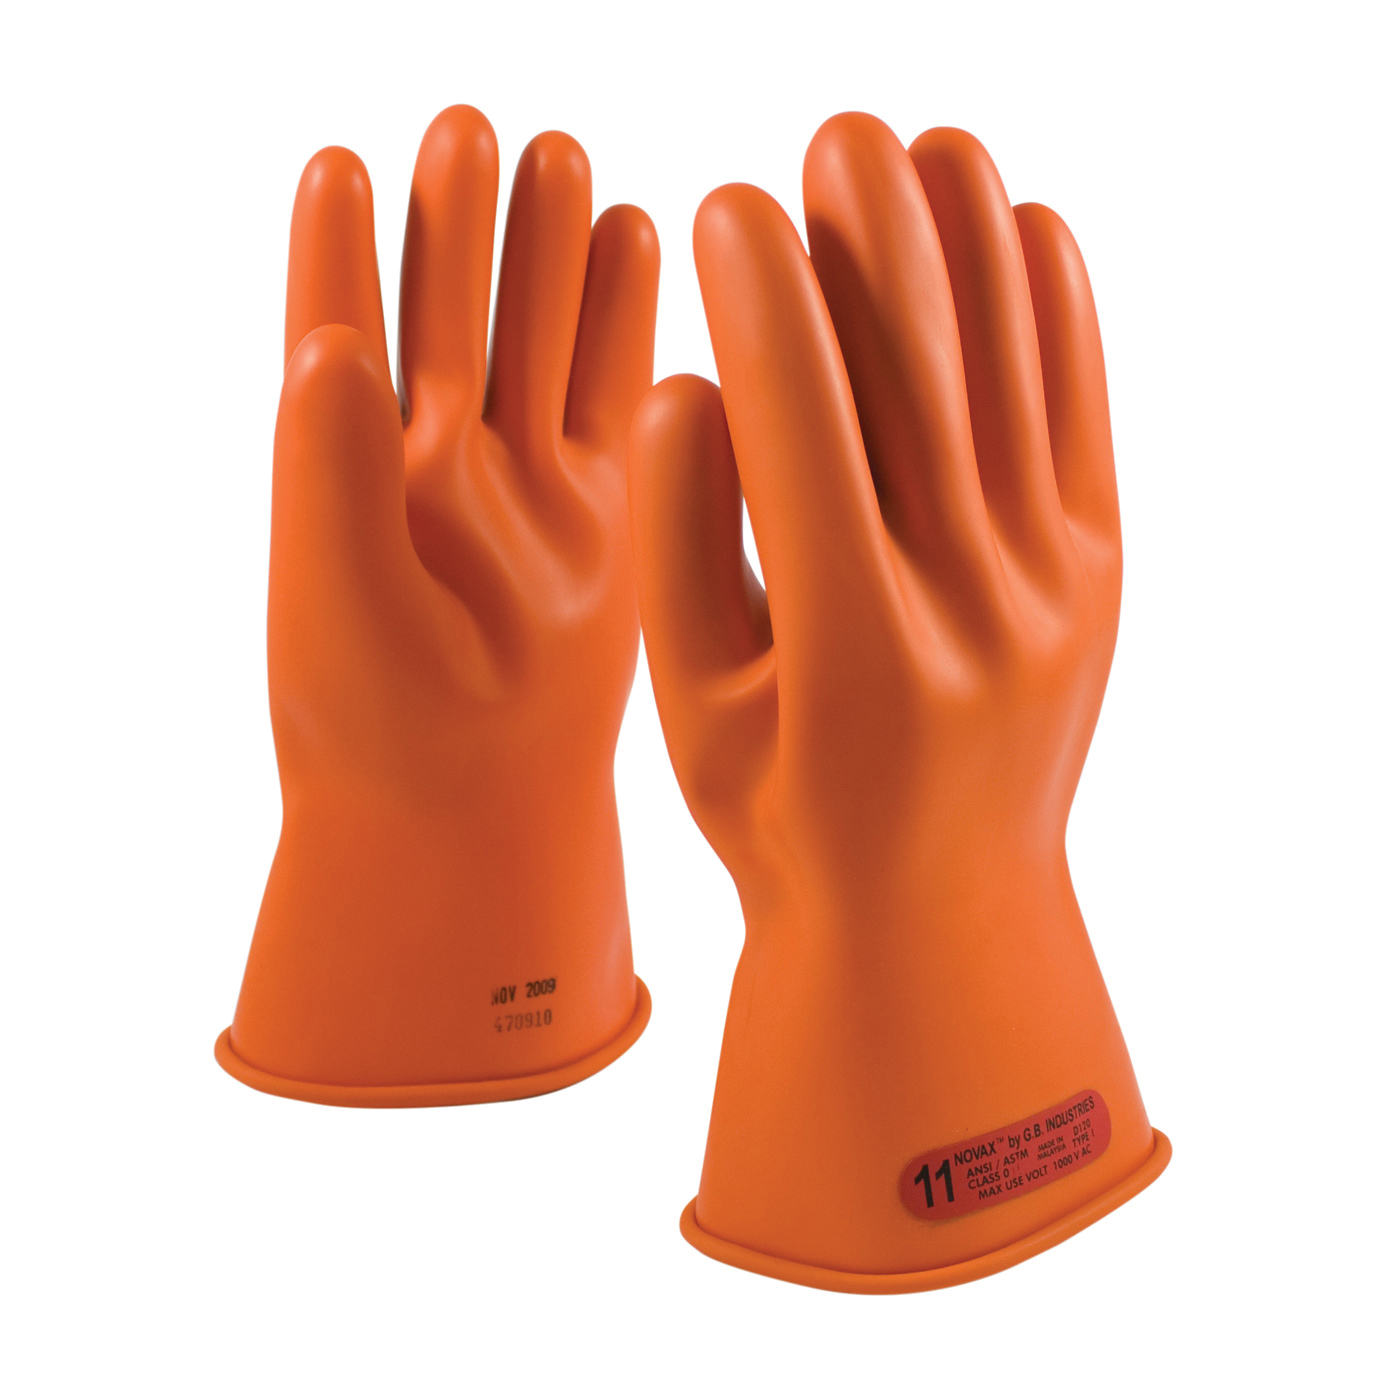 Novax® 147-0-11/8 Insulating Unisex Electrical Safety Gloves, SZ 8, Natural Rubber, Orange, 11 in L, ASTM Class: Class 0, 1000 VAC/1500 VDC Max Use Voltage